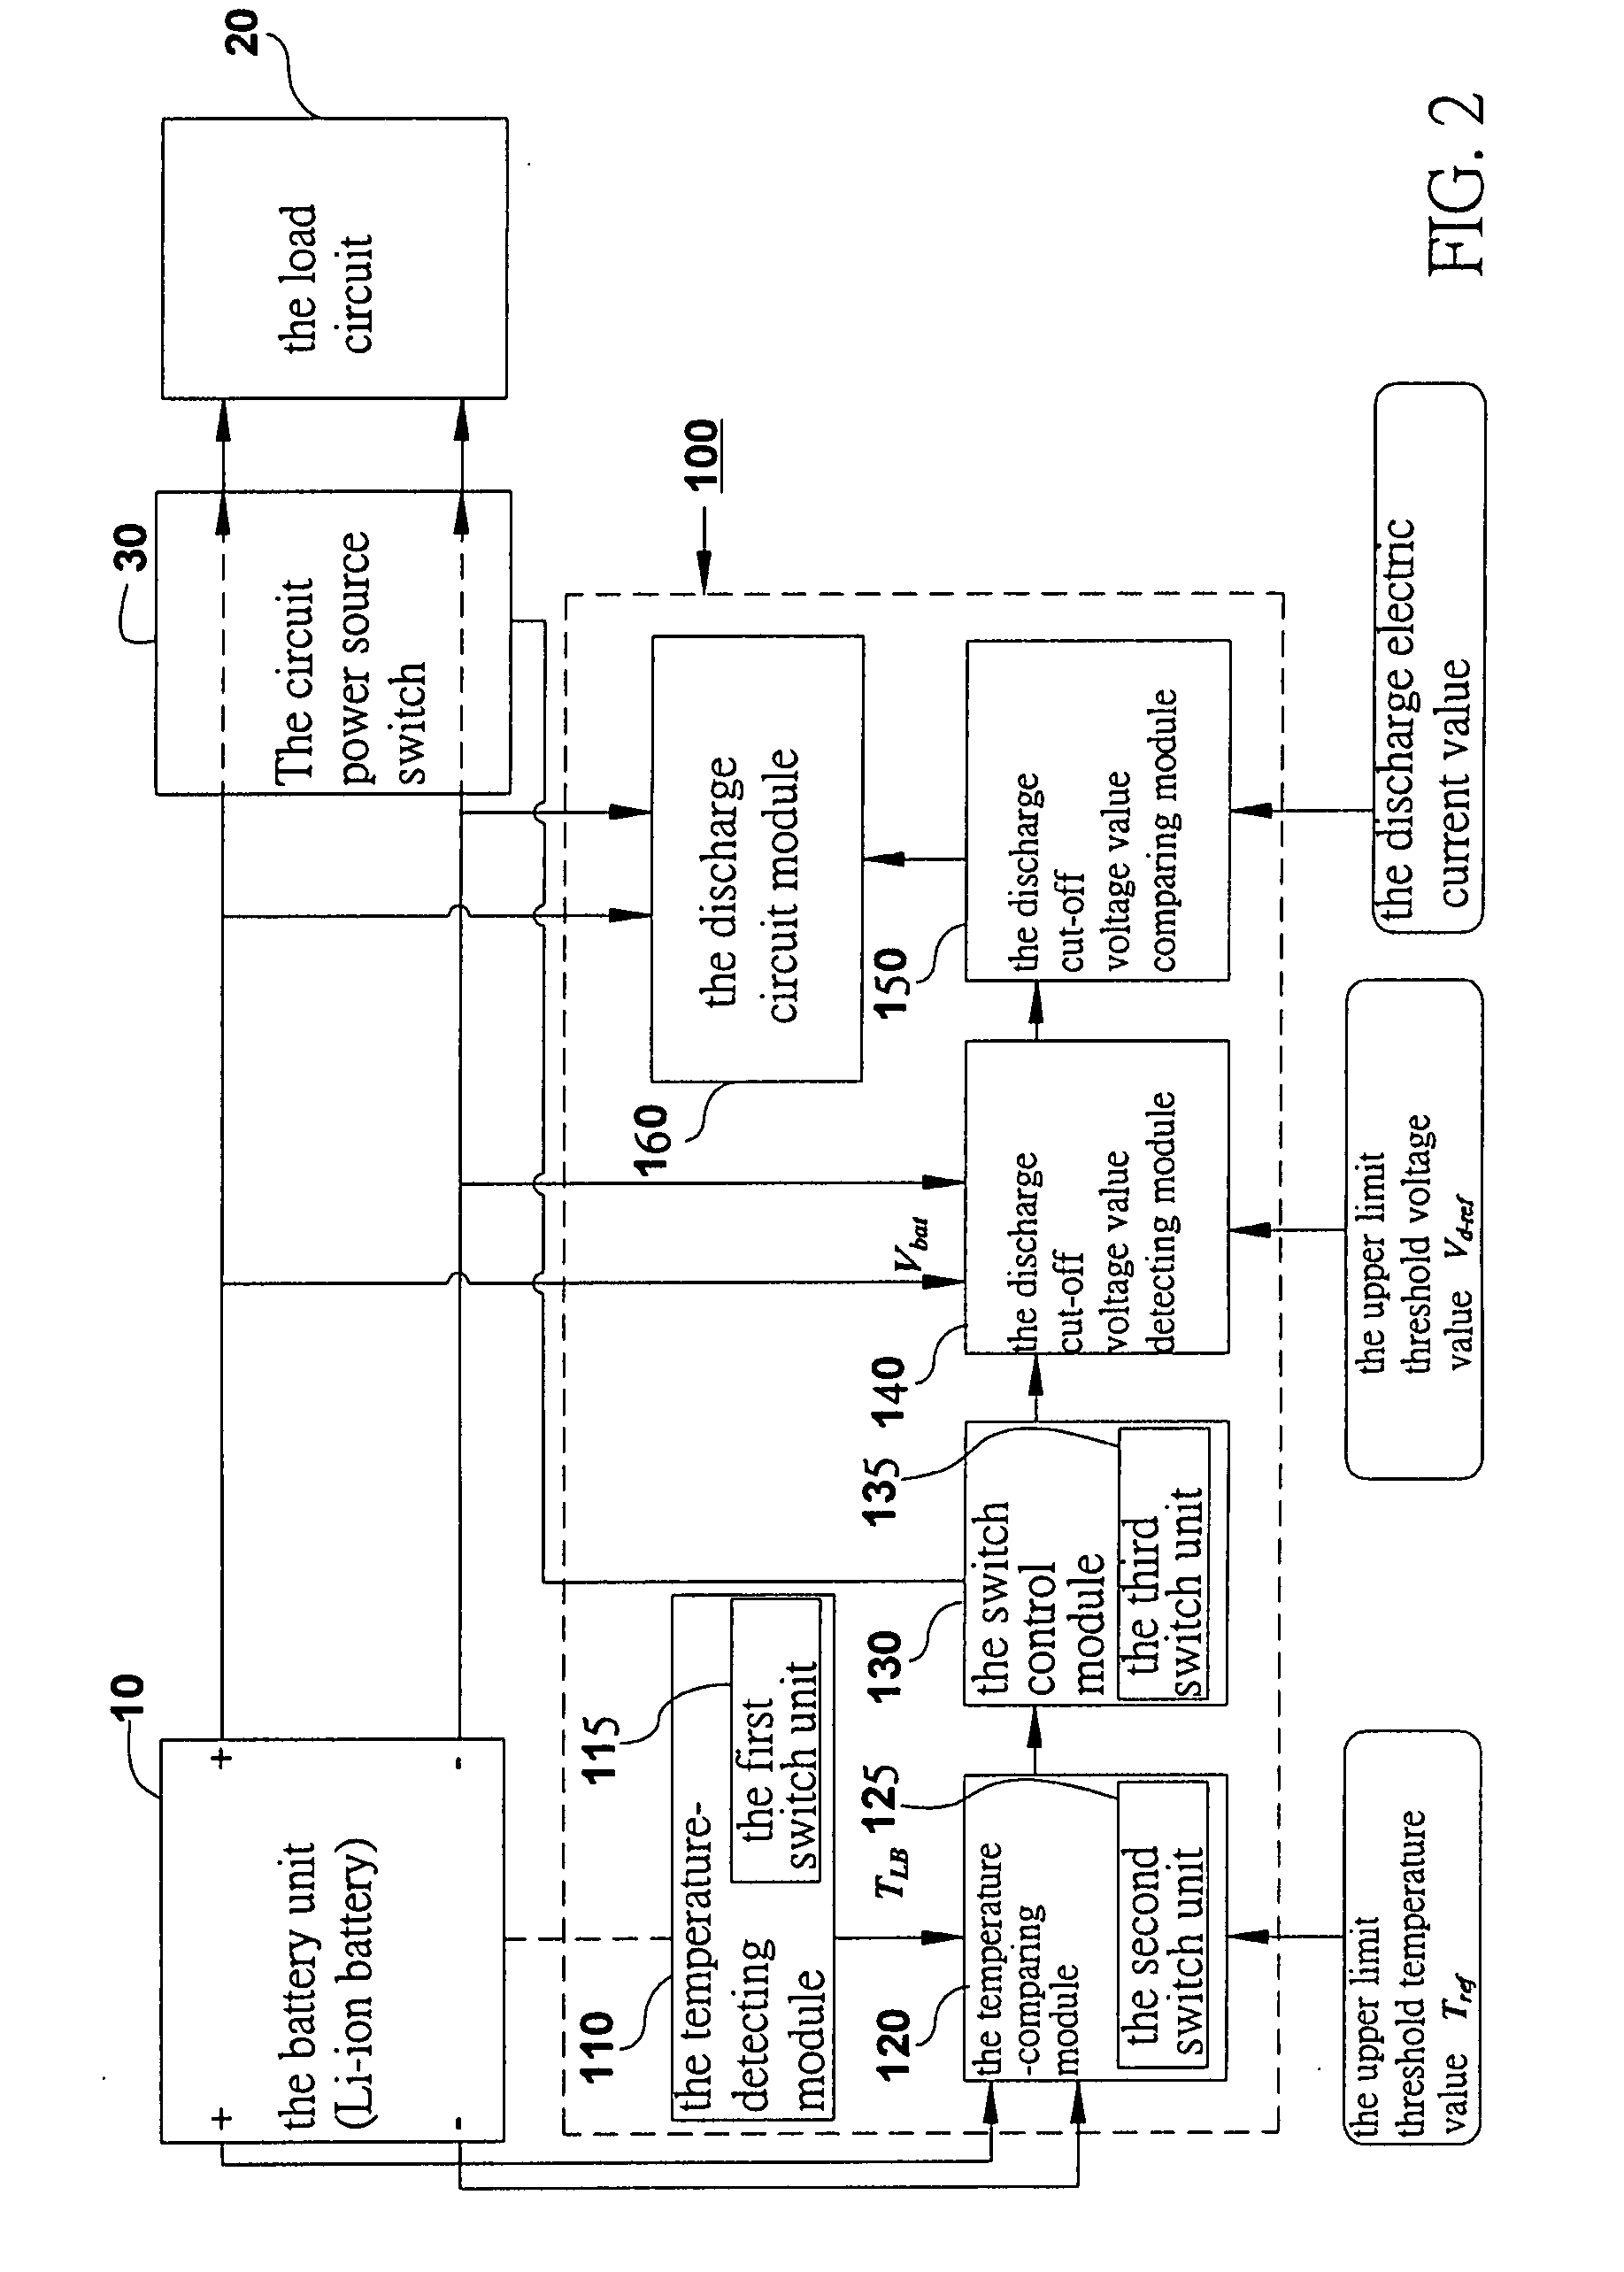 Battery power management method and apparatus for controlling high-temperature condition